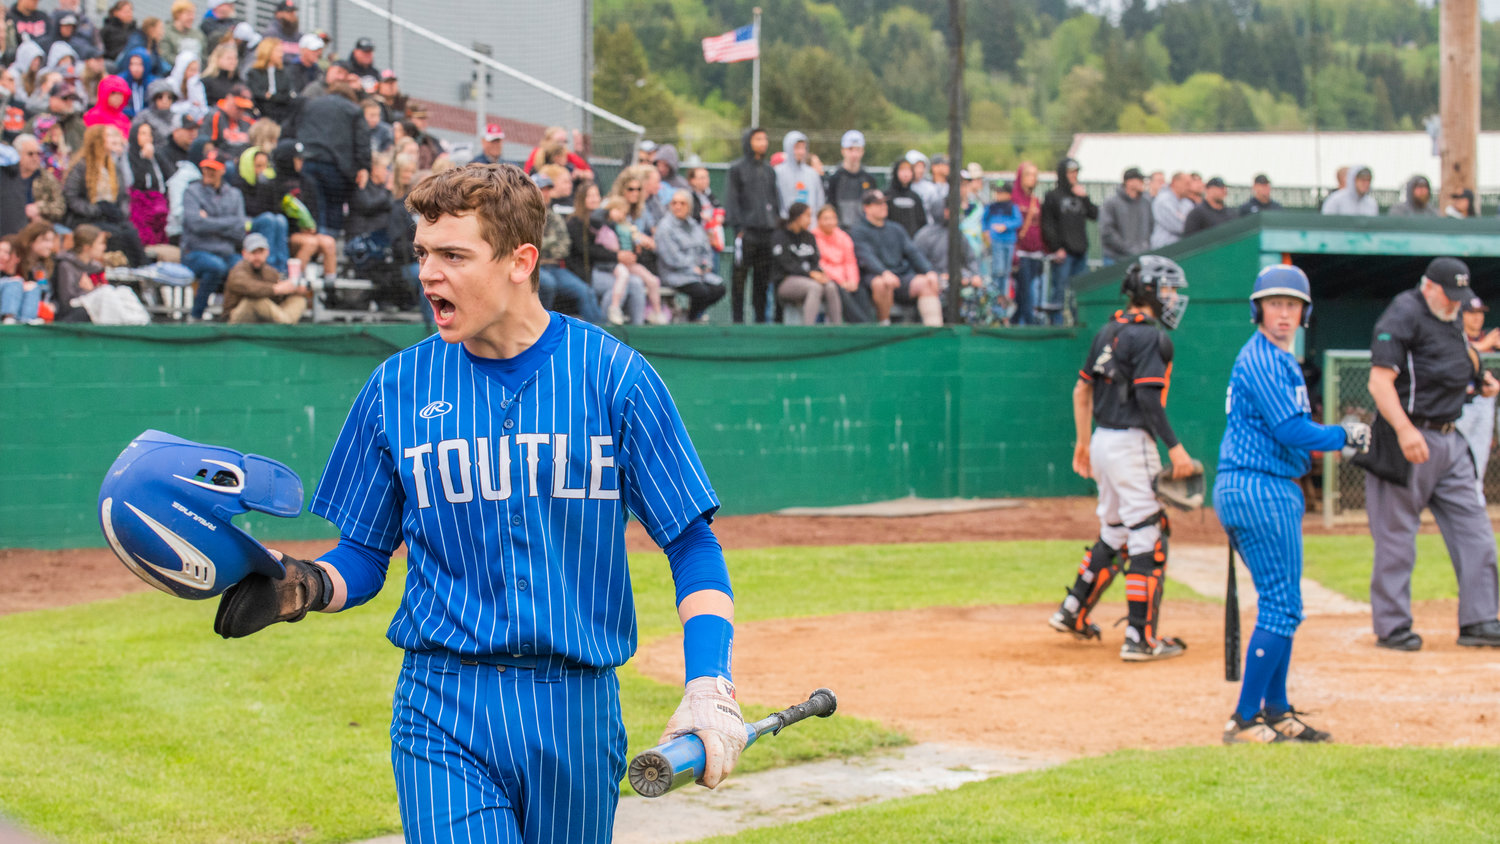 Toutle Lake athletes get hyped up during a 2B District 4 Title game in Chehalis on Friday.